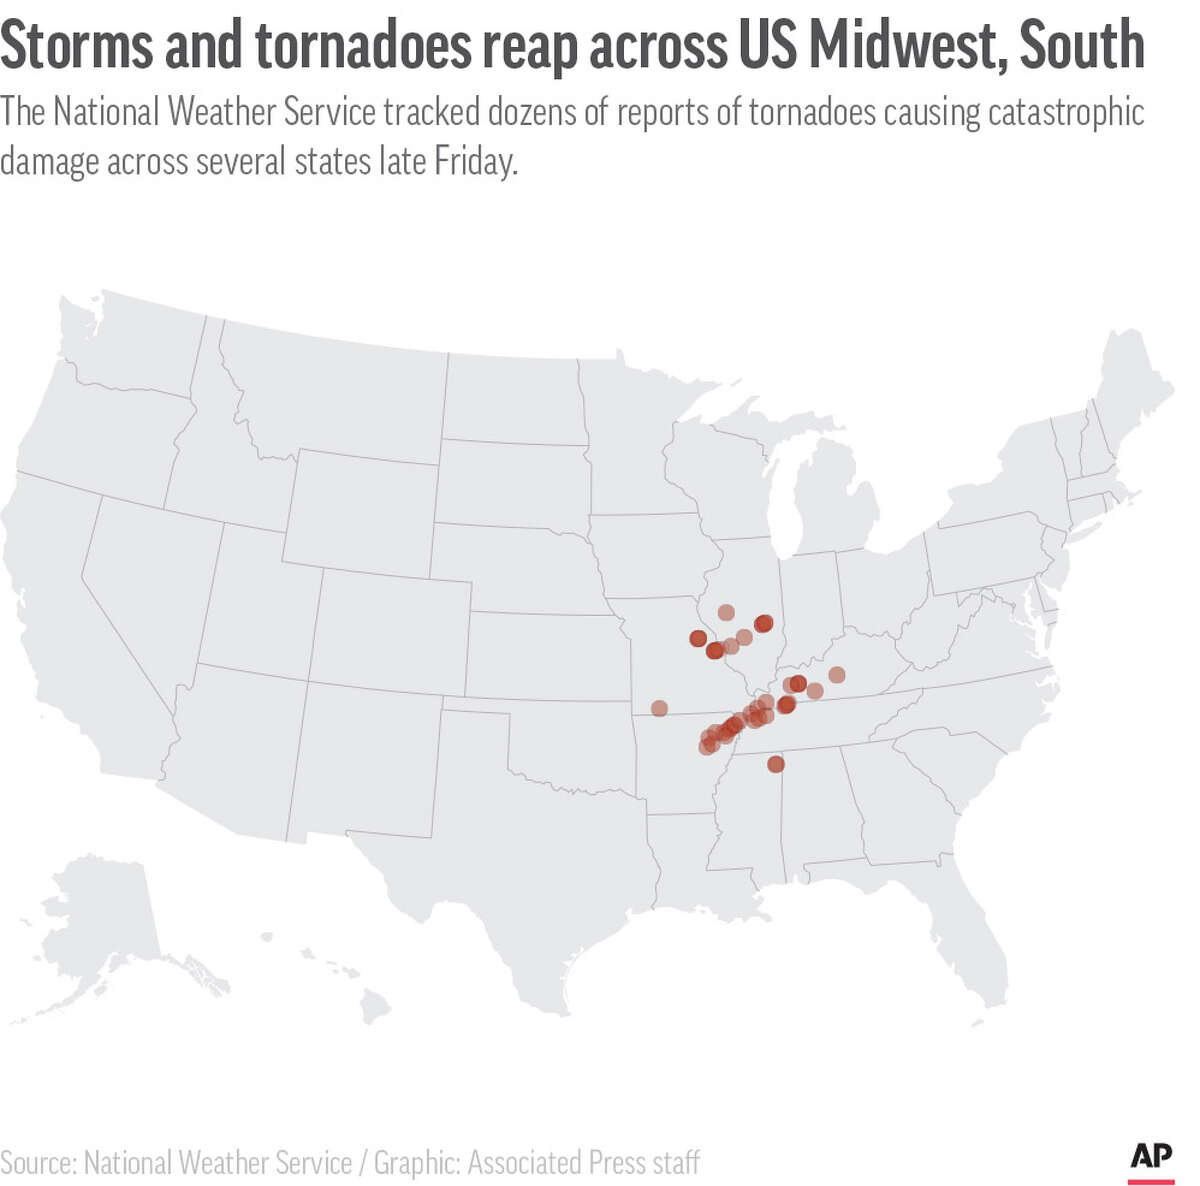 The National Weather Service tracked dozens of tornado reports that caused catastrophic damage late Friday.